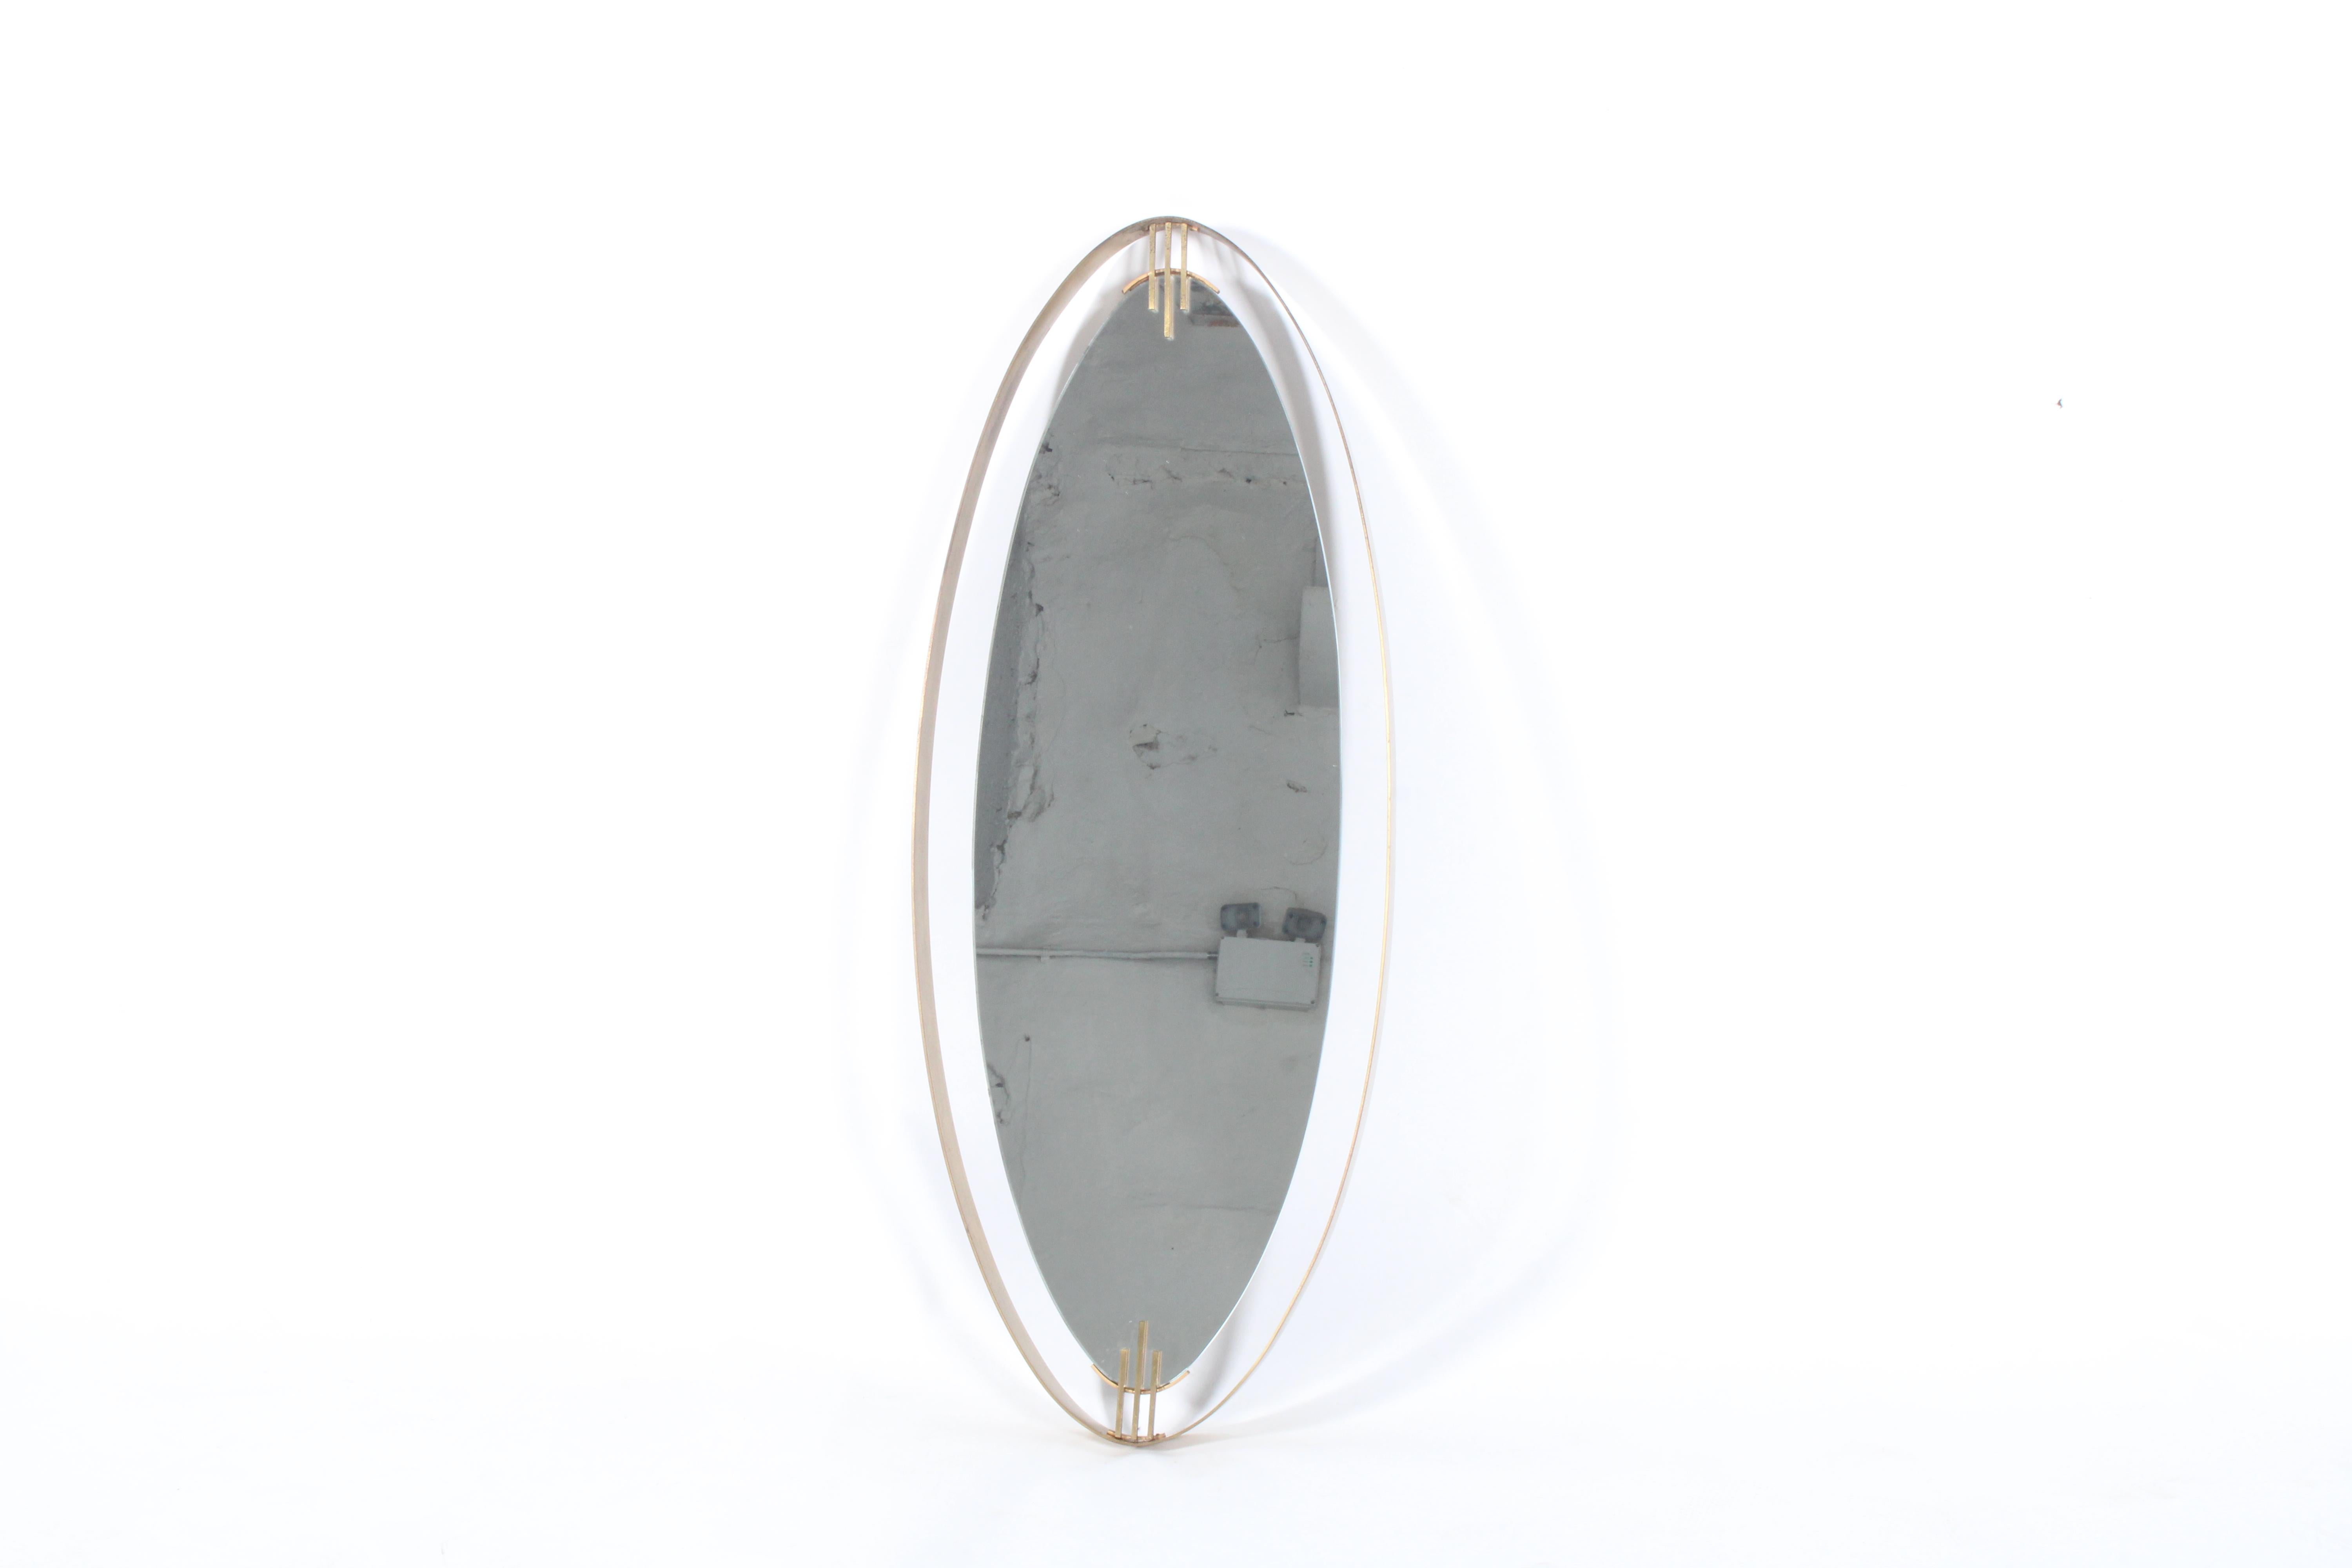 Stunning elliptical brass framed mid century Italian mirror with amazing wear and patina that adds character, charm, authenticity and style to this most attractive piece. Its unusual deep surrounding frame and lovely detailing to the top and bottom